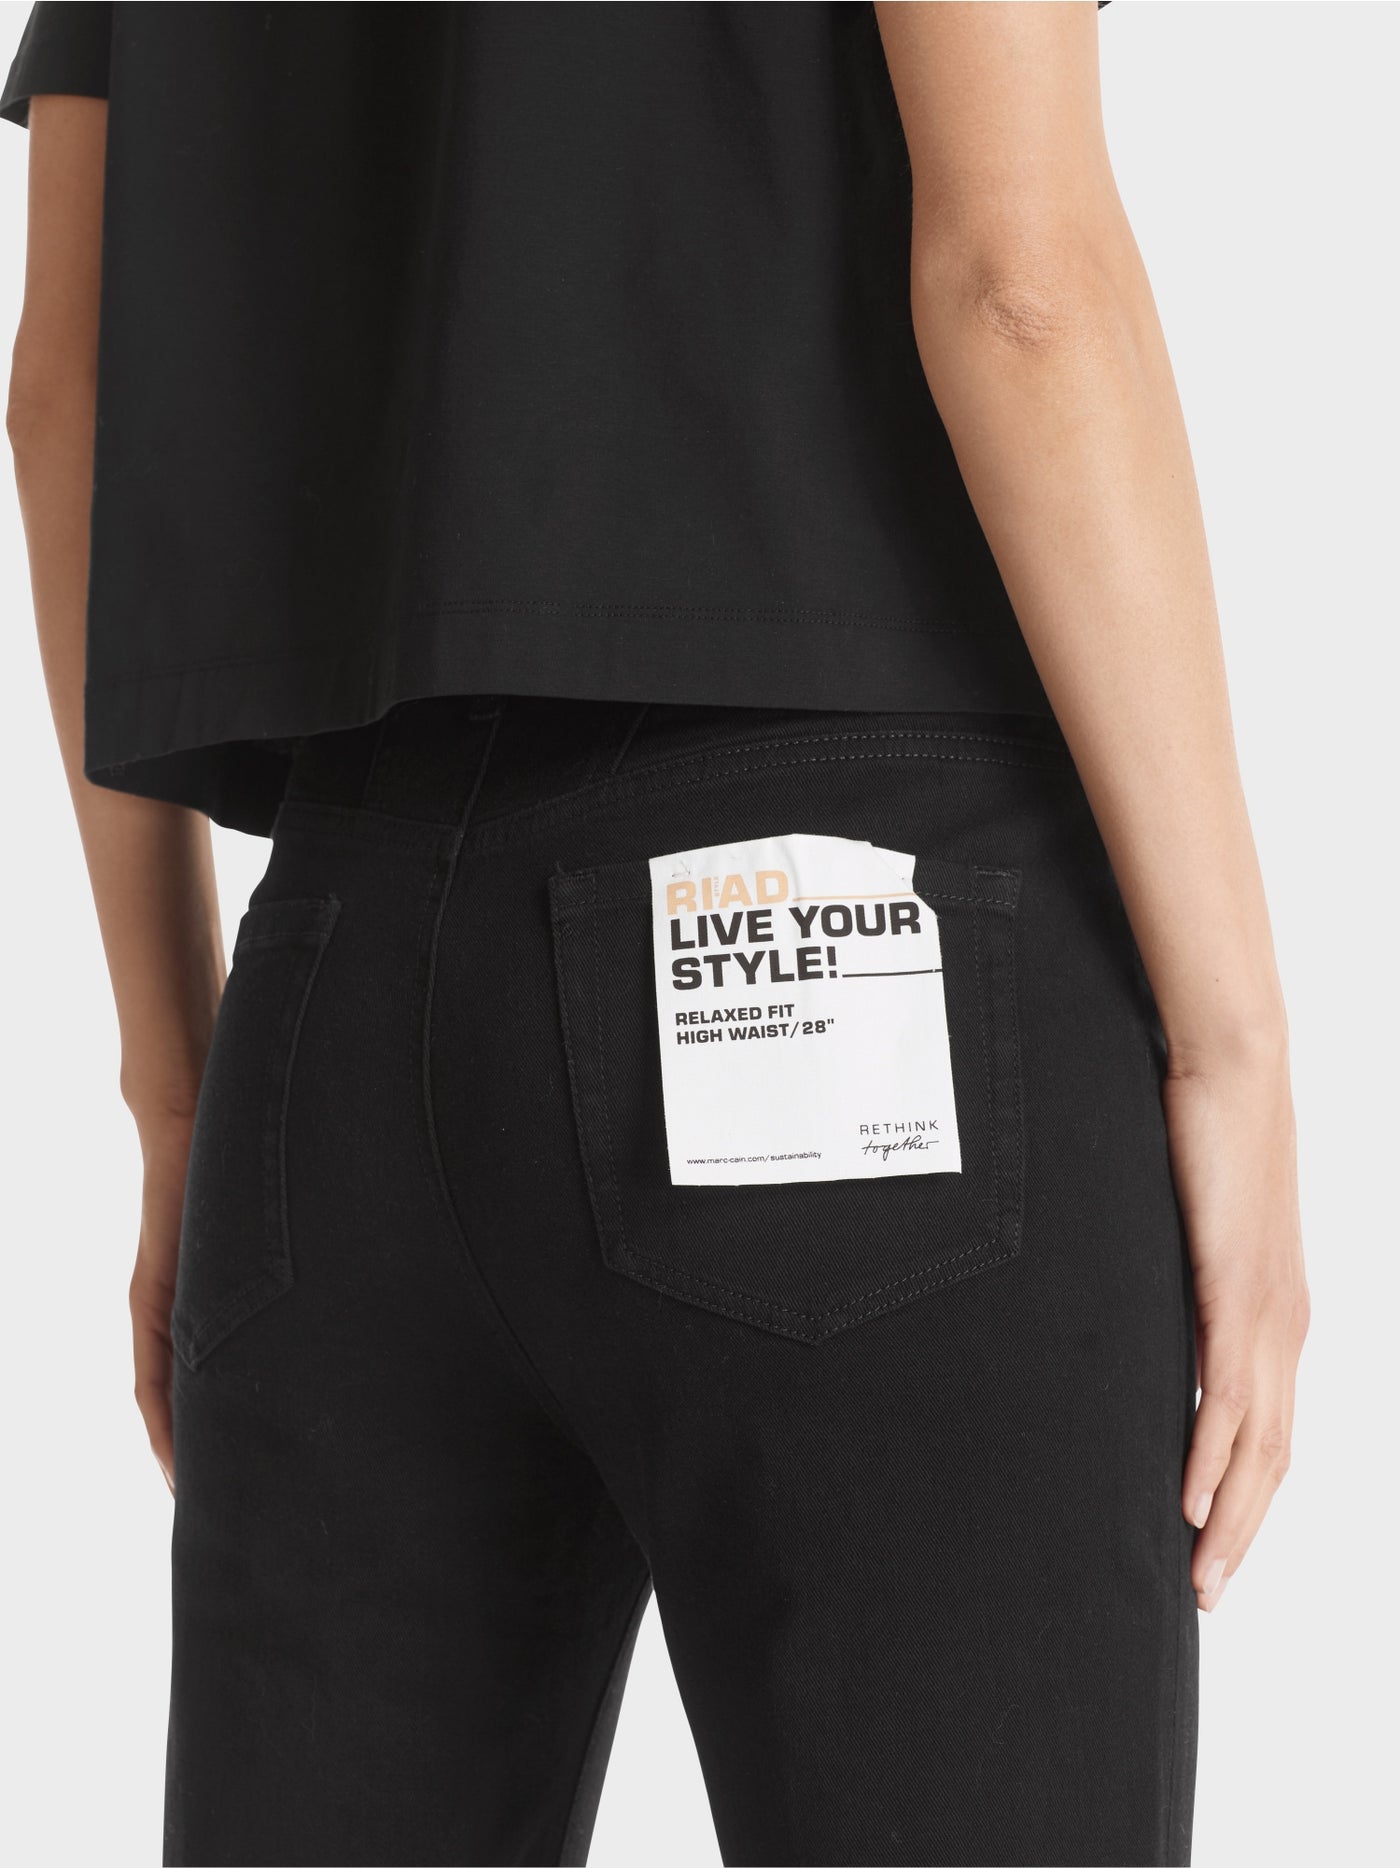 Marc Cain Black RIAD "Rethink Together" Jeans